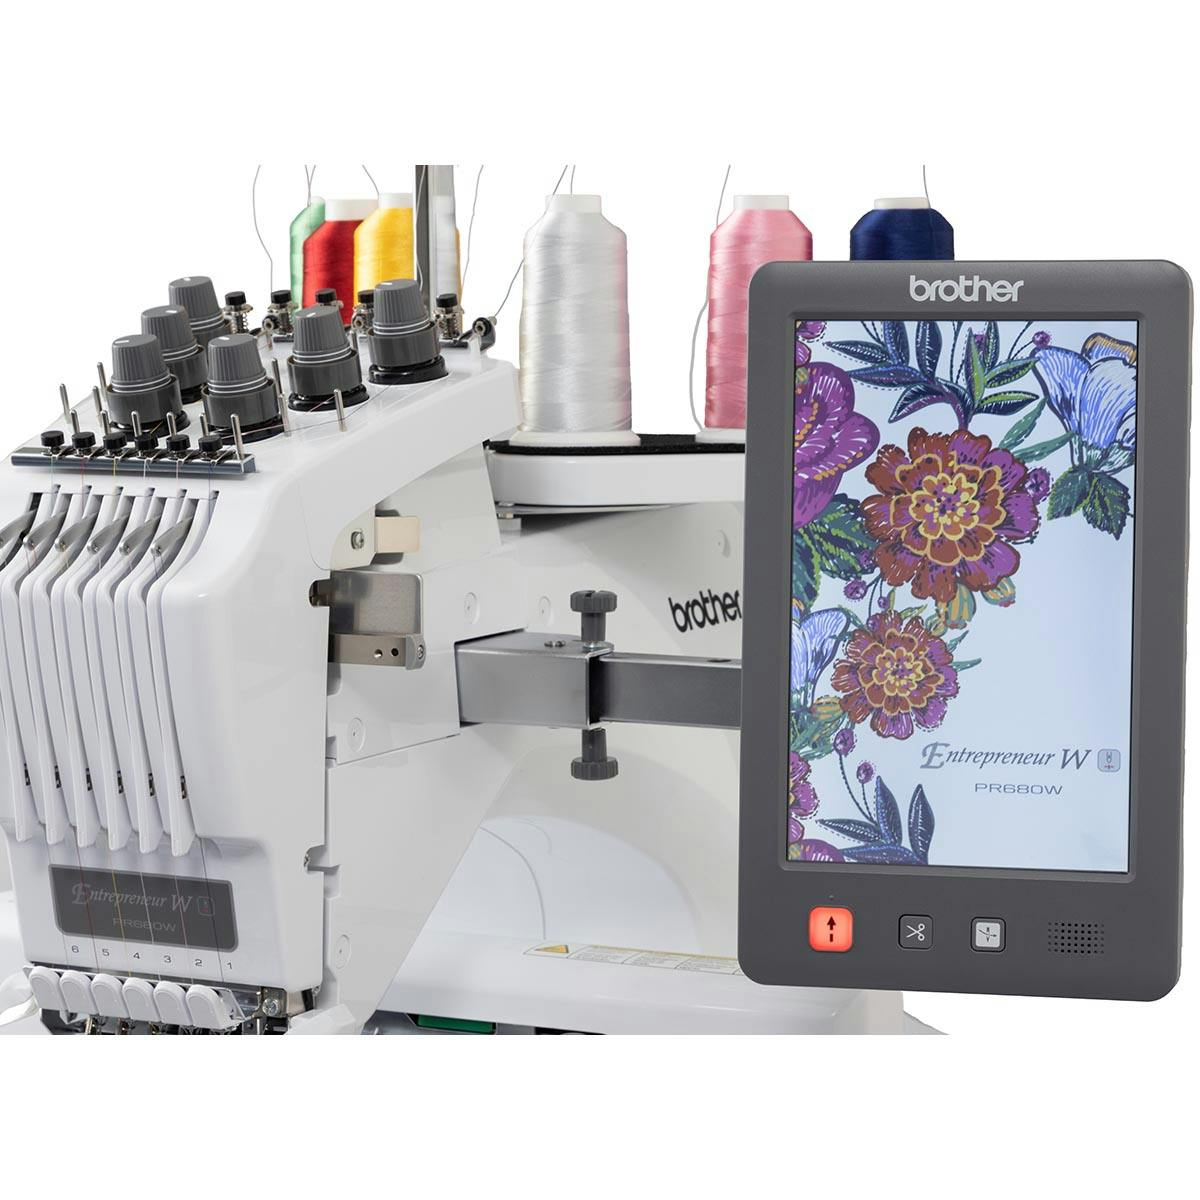 Brother PR680W six needle embroidery machine screen